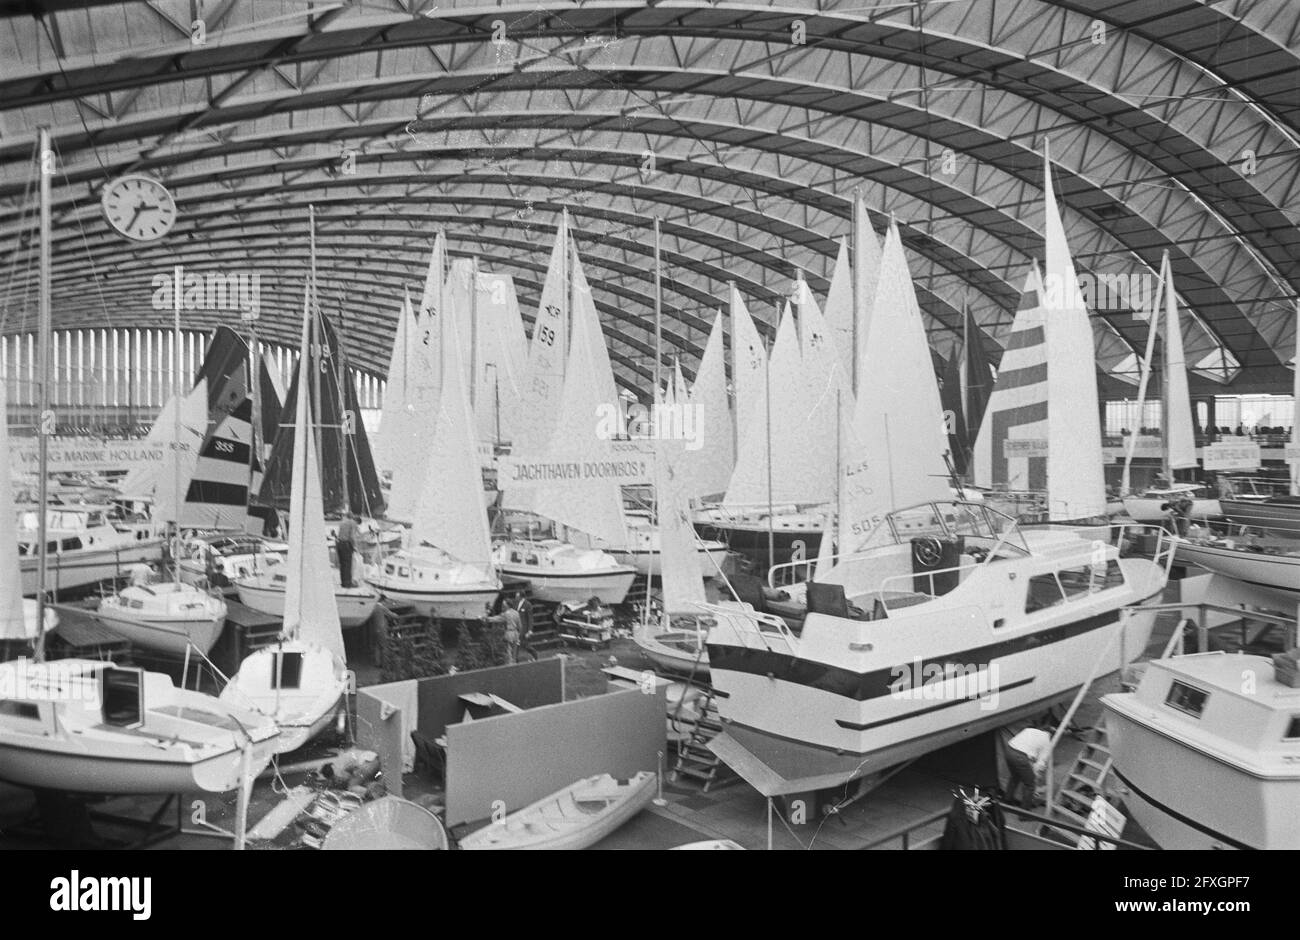 Fifteenth HISWA in RAI Amsterdam. Preparations. Boat with parachute, March 12, 1970, Preparations, fairs, boats, The Netherlands, 20th century press agency photo, news to remember, documentary, historic photography 1945-1990, visual stories, human history of the Twentieth Century, capturing moments in time Stock Photo